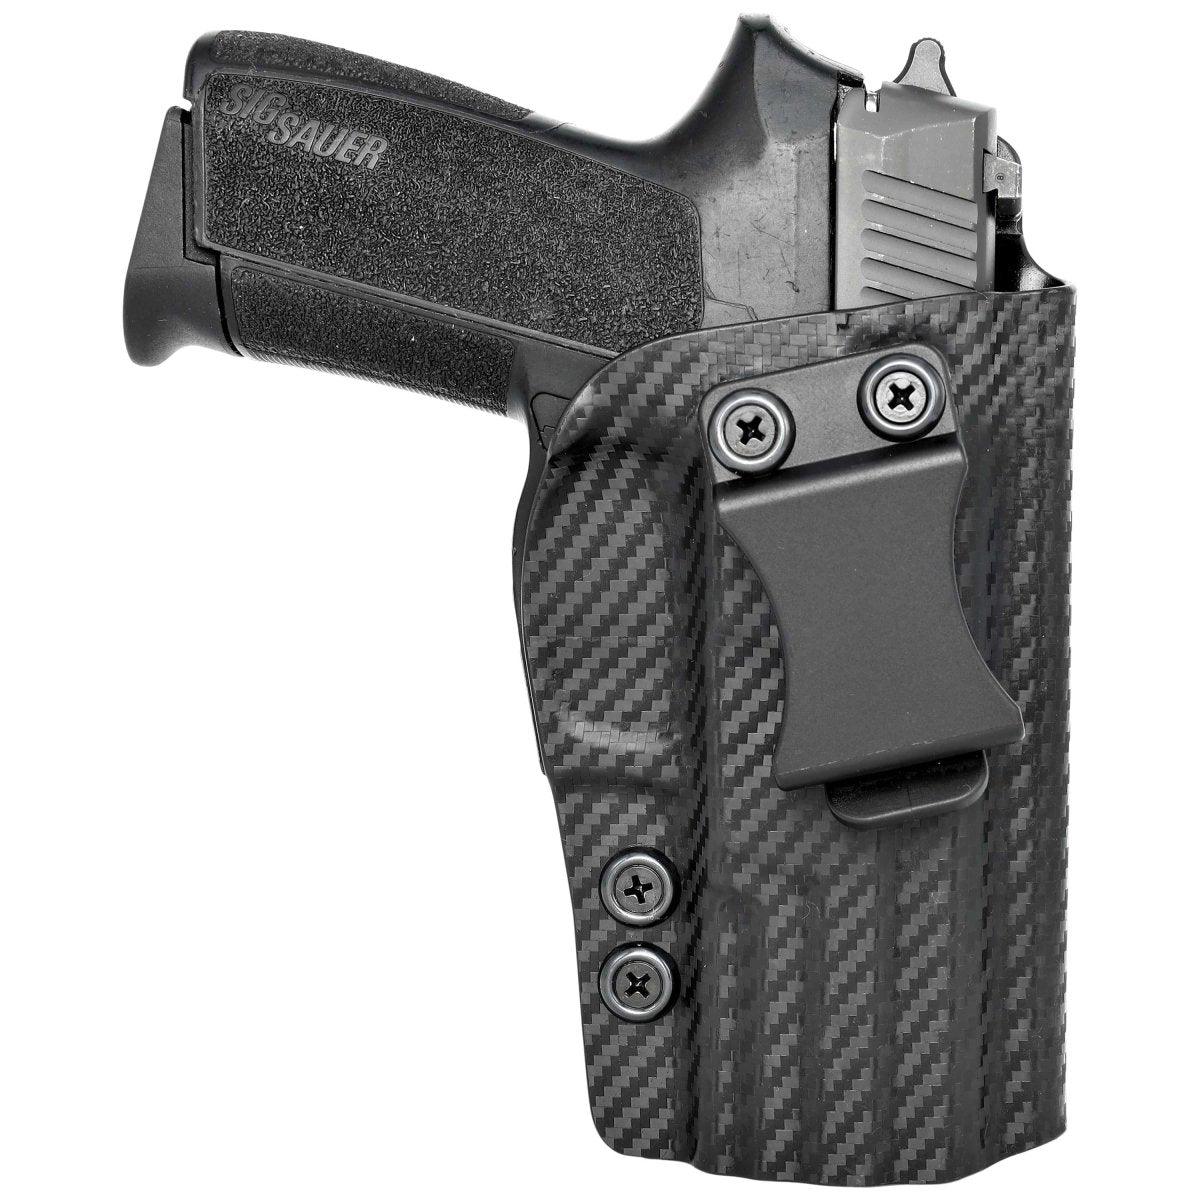 SP2022 HOLSTERS